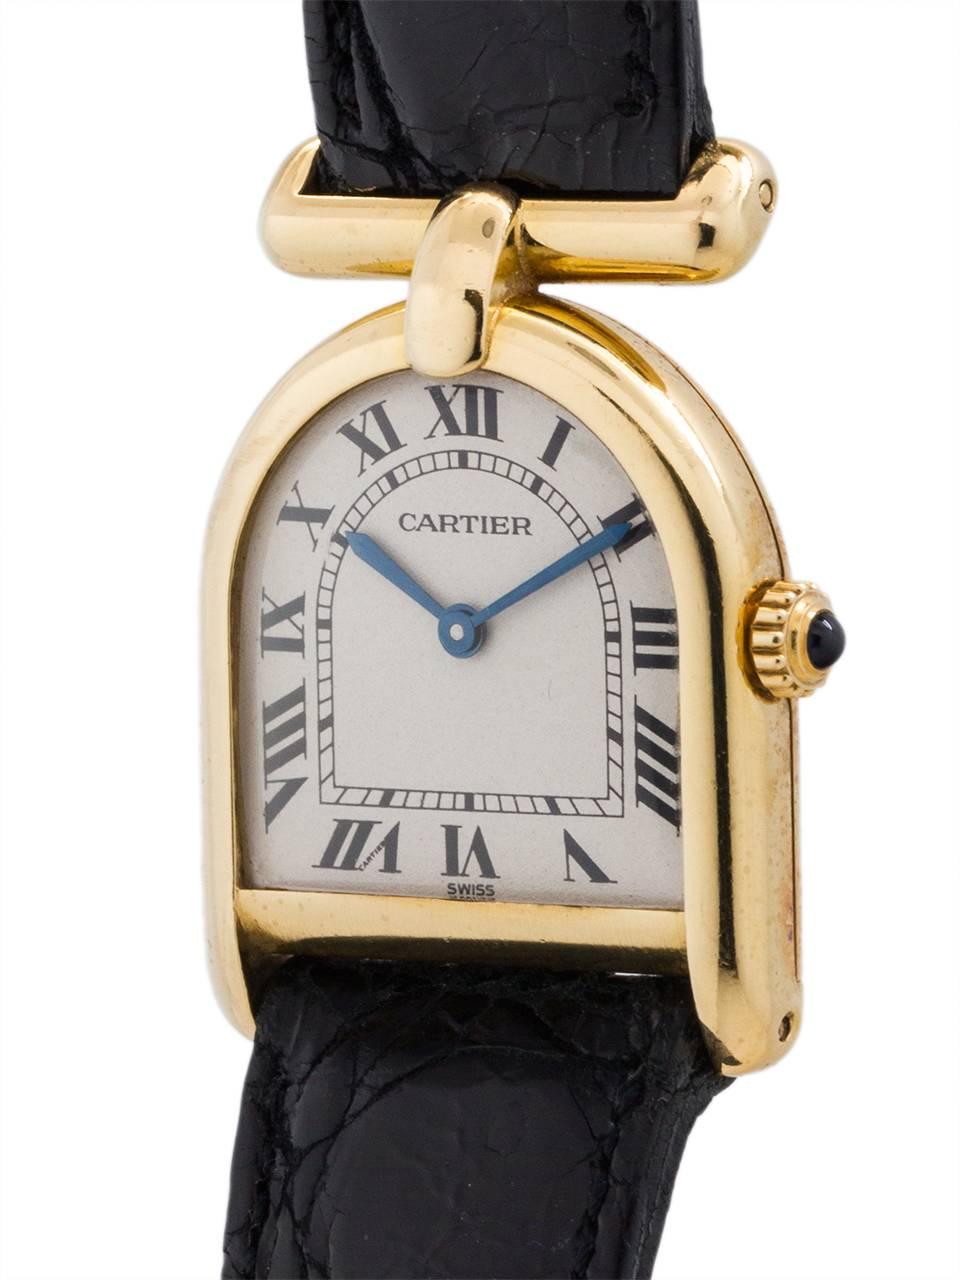 Cartier 18K YG Lady “Cloche” circa 1990’s. Featuring unusual bell shaped (cloche) case secured by 4 gold case screws, classic white dial with black printed Roman figures, with blued steel hands, cabochon sapphire crystal, and battery powered quartz